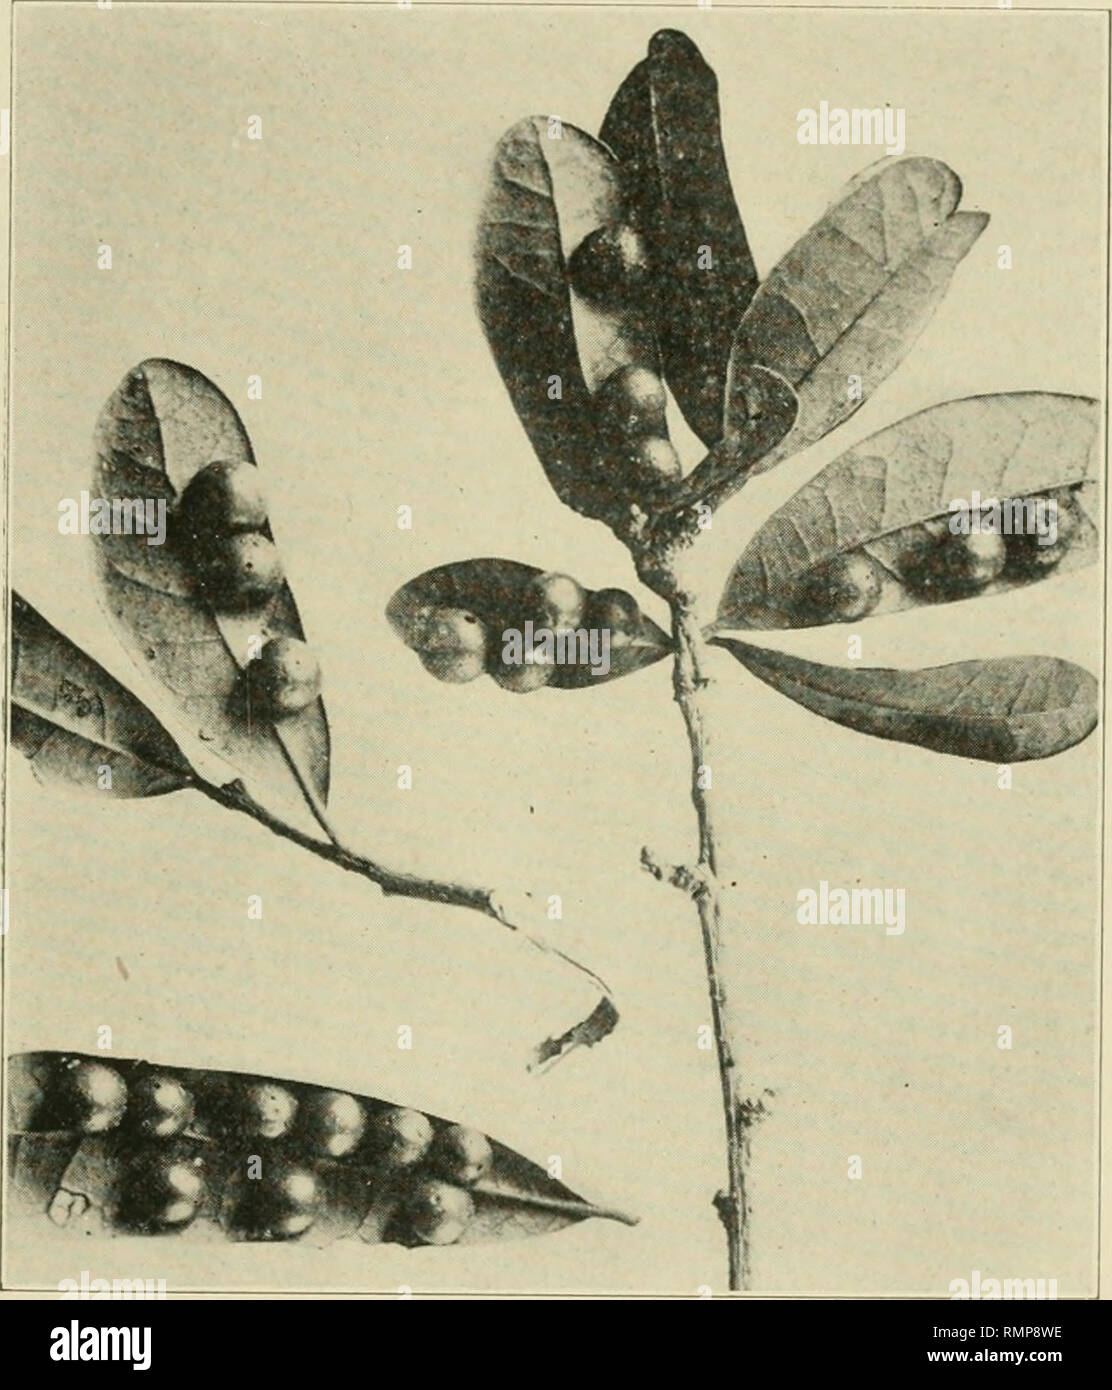 . Annals of the Entomological Society of America. Entomology. 1920] Dozier: Insects of Florida 349 floridensis, was found infesting a branch of Pinus palustris, but this is of unusual occurrence. (Fig. 19). Aphids are plentiful, together with their parasites and pre- dators on the different trees and shrubs To be particularly noted are the hickory Phylloxera galls and the large black pine aphid, Lachnus pint. The latter is parasitized by the hymenop- teron, Aphidius hifasciatiis. A clear and extremely interesting. Fig. 18. Galls of Andricjis virens Ashm. on live oak, Querciis virginiana. case  Stock Photo